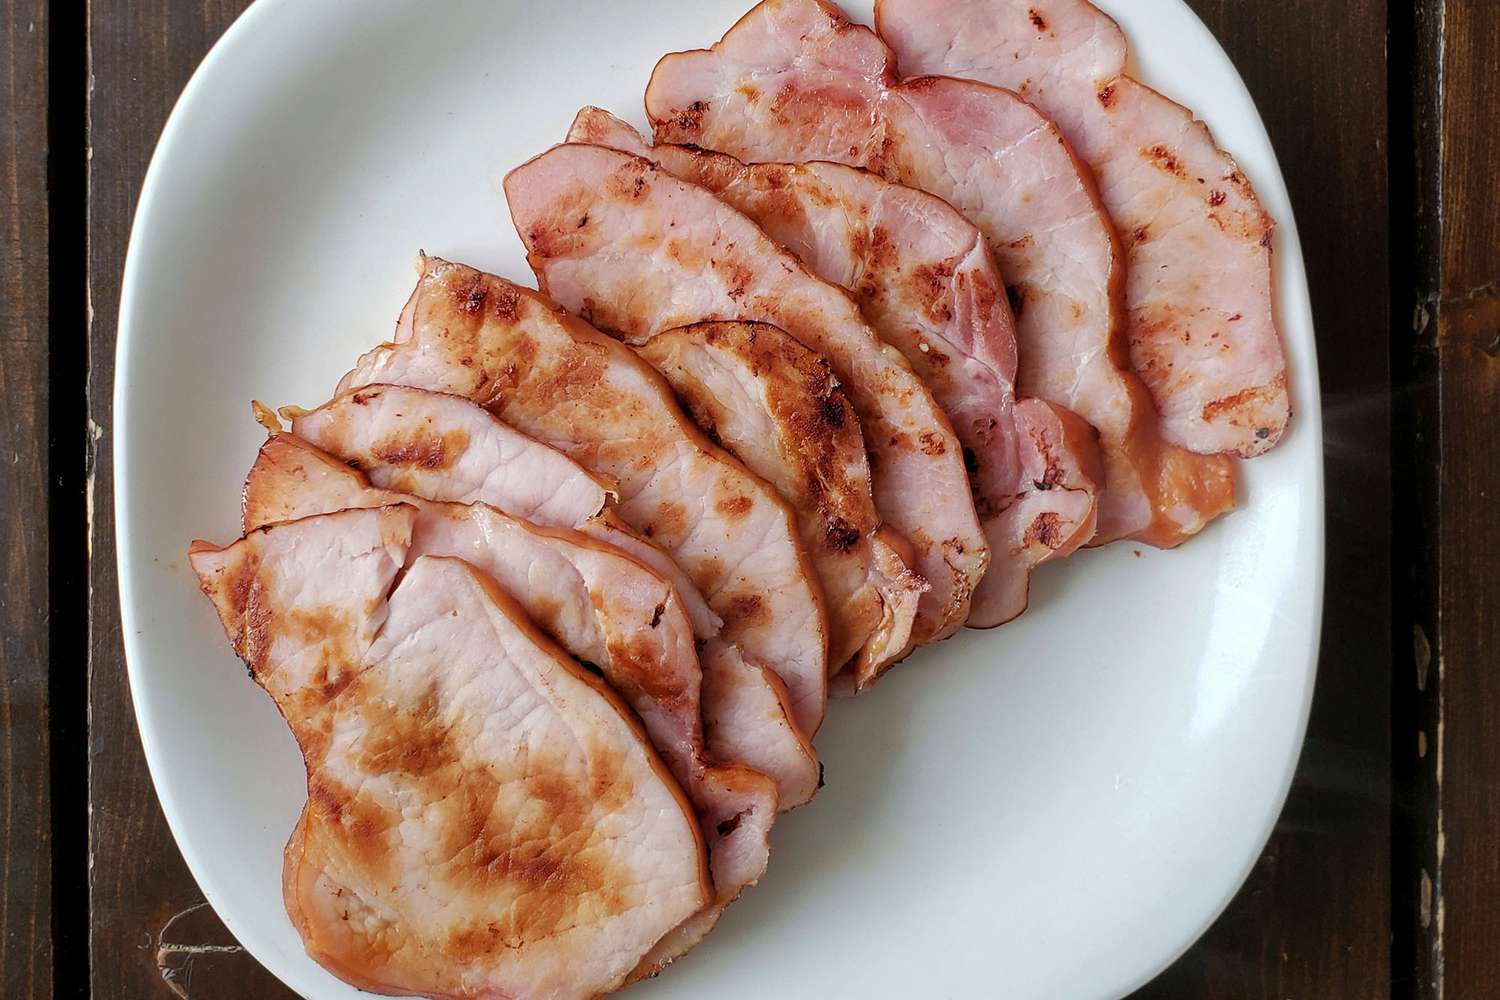 Bacon in a plate